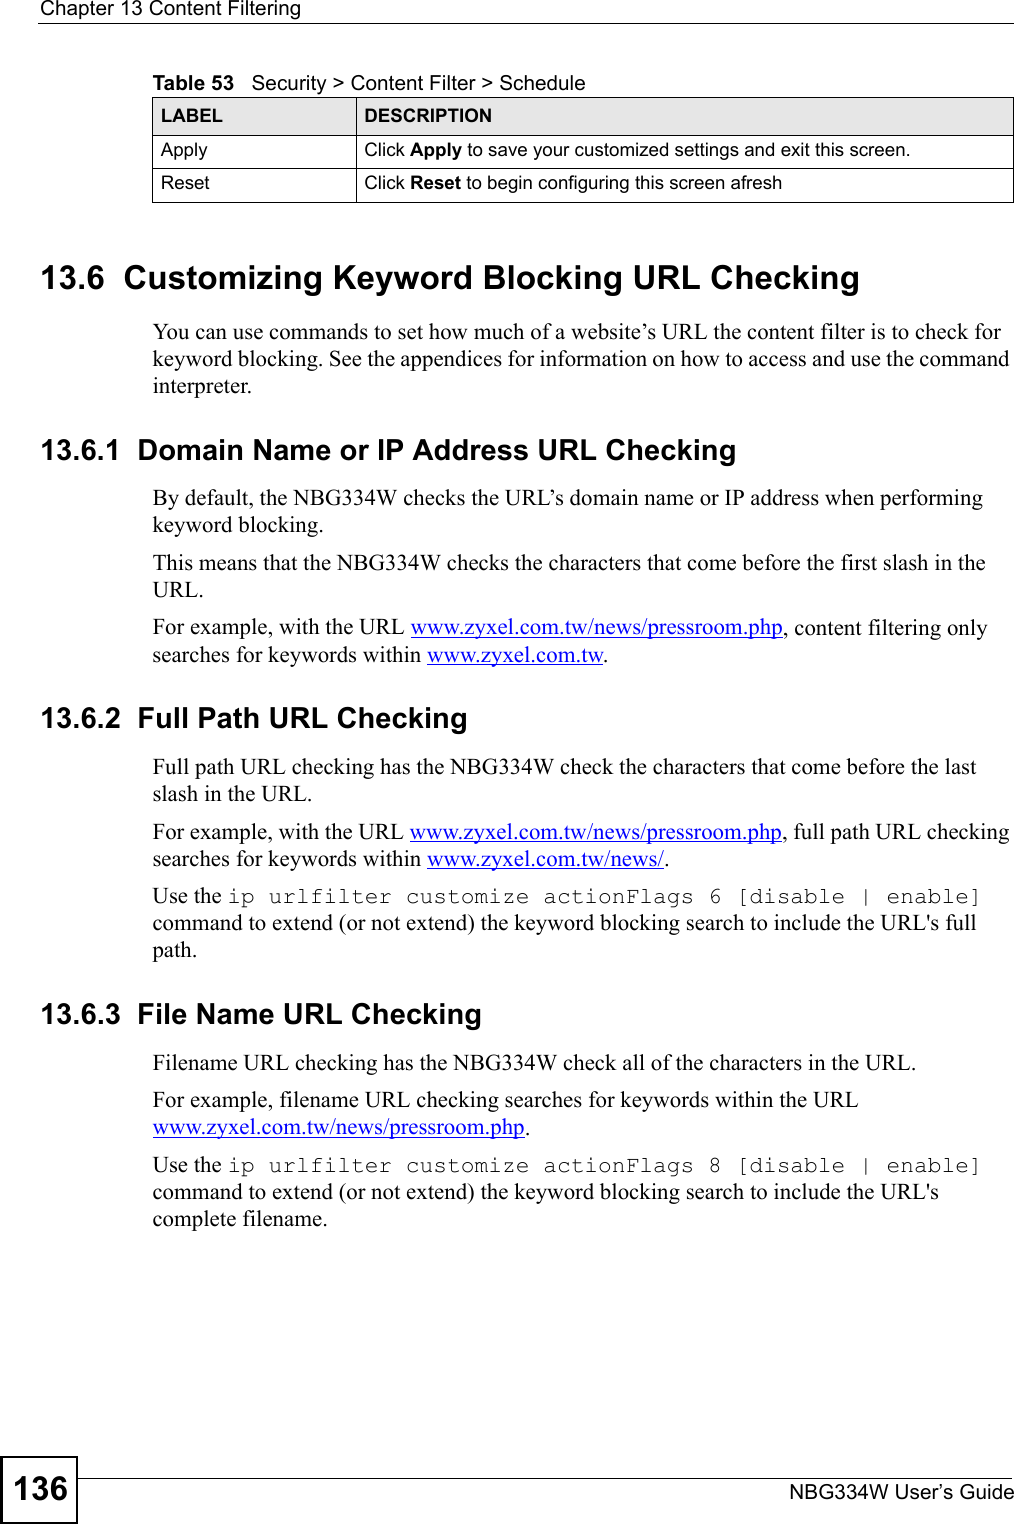 Chapter 13 Content FilteringNBG334W User’s Guide13613.6  Customizing Keyword Blocking URL CheckingYou can use commands to set how much of a website’s URL the content filter is to check for keyword blocking. See the appendices for information on how to access and use the command interpreter.13.6.1  Domain Name or IP Address URL CheckingBy default, the NBG334W checks the URL’s domain name or IP address when performing keyword blocking.This means that the NBG334W checks the characters that come before the first slash in the URL.For example, with the URL www.zyxel.com.tw/news/pressroom.php, content filtering only searches for keywords within www.zyxel.com.tw.13.6.2  Full Path URL CheckingFull path URL checking has the NBG334W check the characters that come before the last slash in the URL.For example, with the URL www.zyxel.com.tw/news/pressroom.php, full path URL checking searches for keywords within www.zyxel.com.tw/news/.Use the ip urlfilter customize actionFlags 6 [disable | enable] command to extend (or not extend) the keyword blocking search to include the URL&apos;s full path.13.6.3  File Name URL CheckingFilename URL checking has the NBG334W check all of the characters in the URL.For example, filename URL checking searches for keywords within the URL www.zyxel.com.tw/news/pressroom.php.Use the ip urlfilter customize actionFlags 8 [disable | enable] command to extend (or not extend) the keyword blocking search to include the URL&apos;s complete filename.Apply Click Apply to save your customized settings and exit this screen.Reset Click Reset to begin configuring this screen afreshTable 53   Security &gt; Content Filter &gt; ScheduleLABEL DESCRIPTION